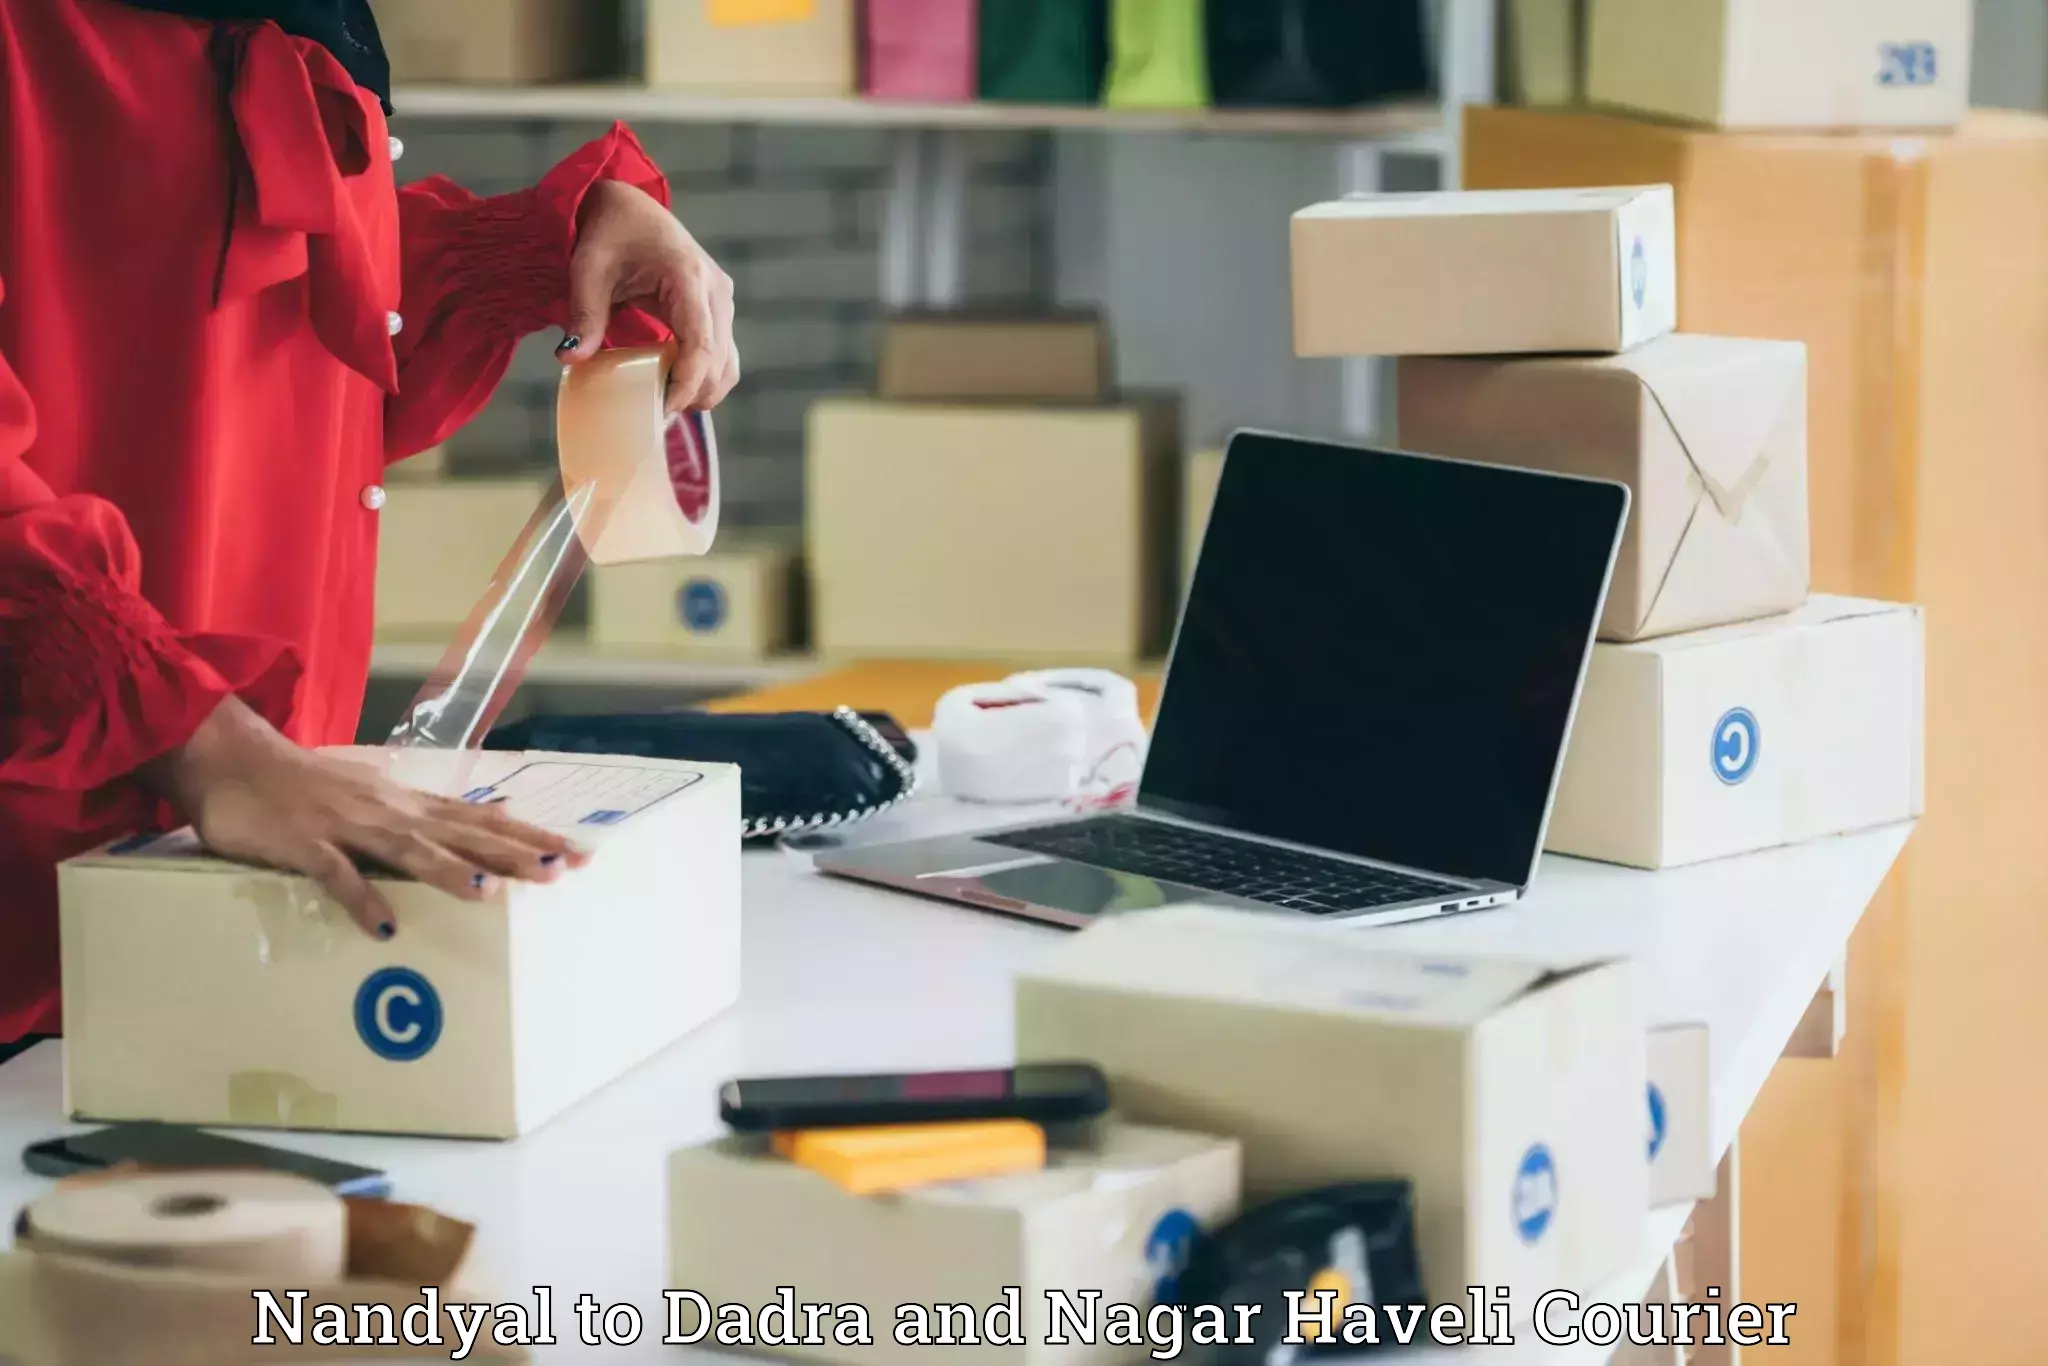 State-of-the-art courier technology Nandyal to Silvassa